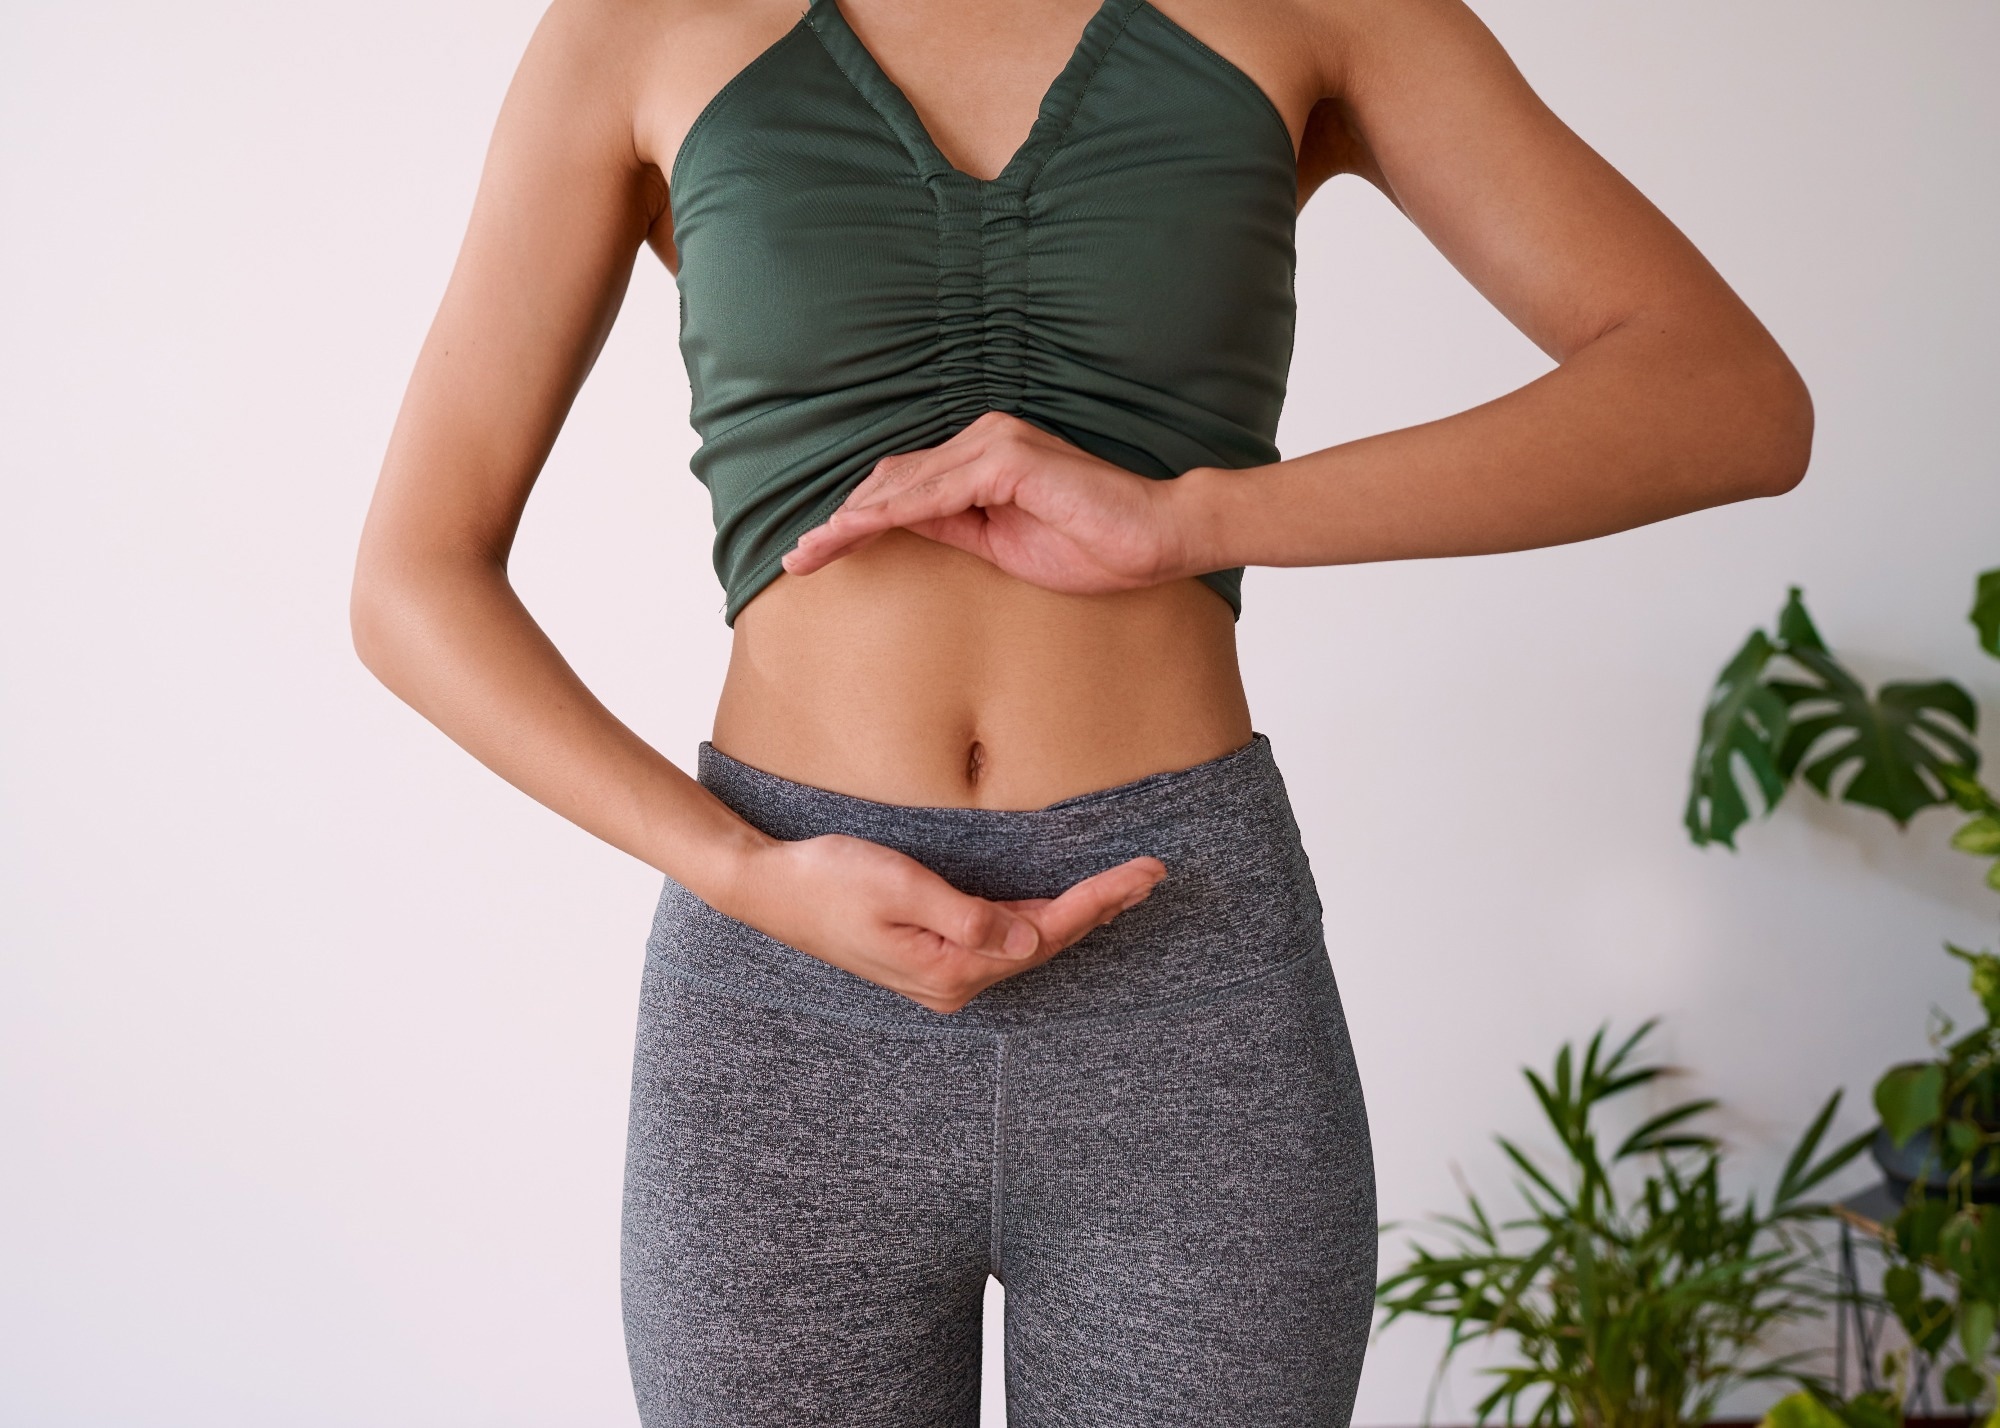 The microbiota connection, gut health linked to metabolic syndrome